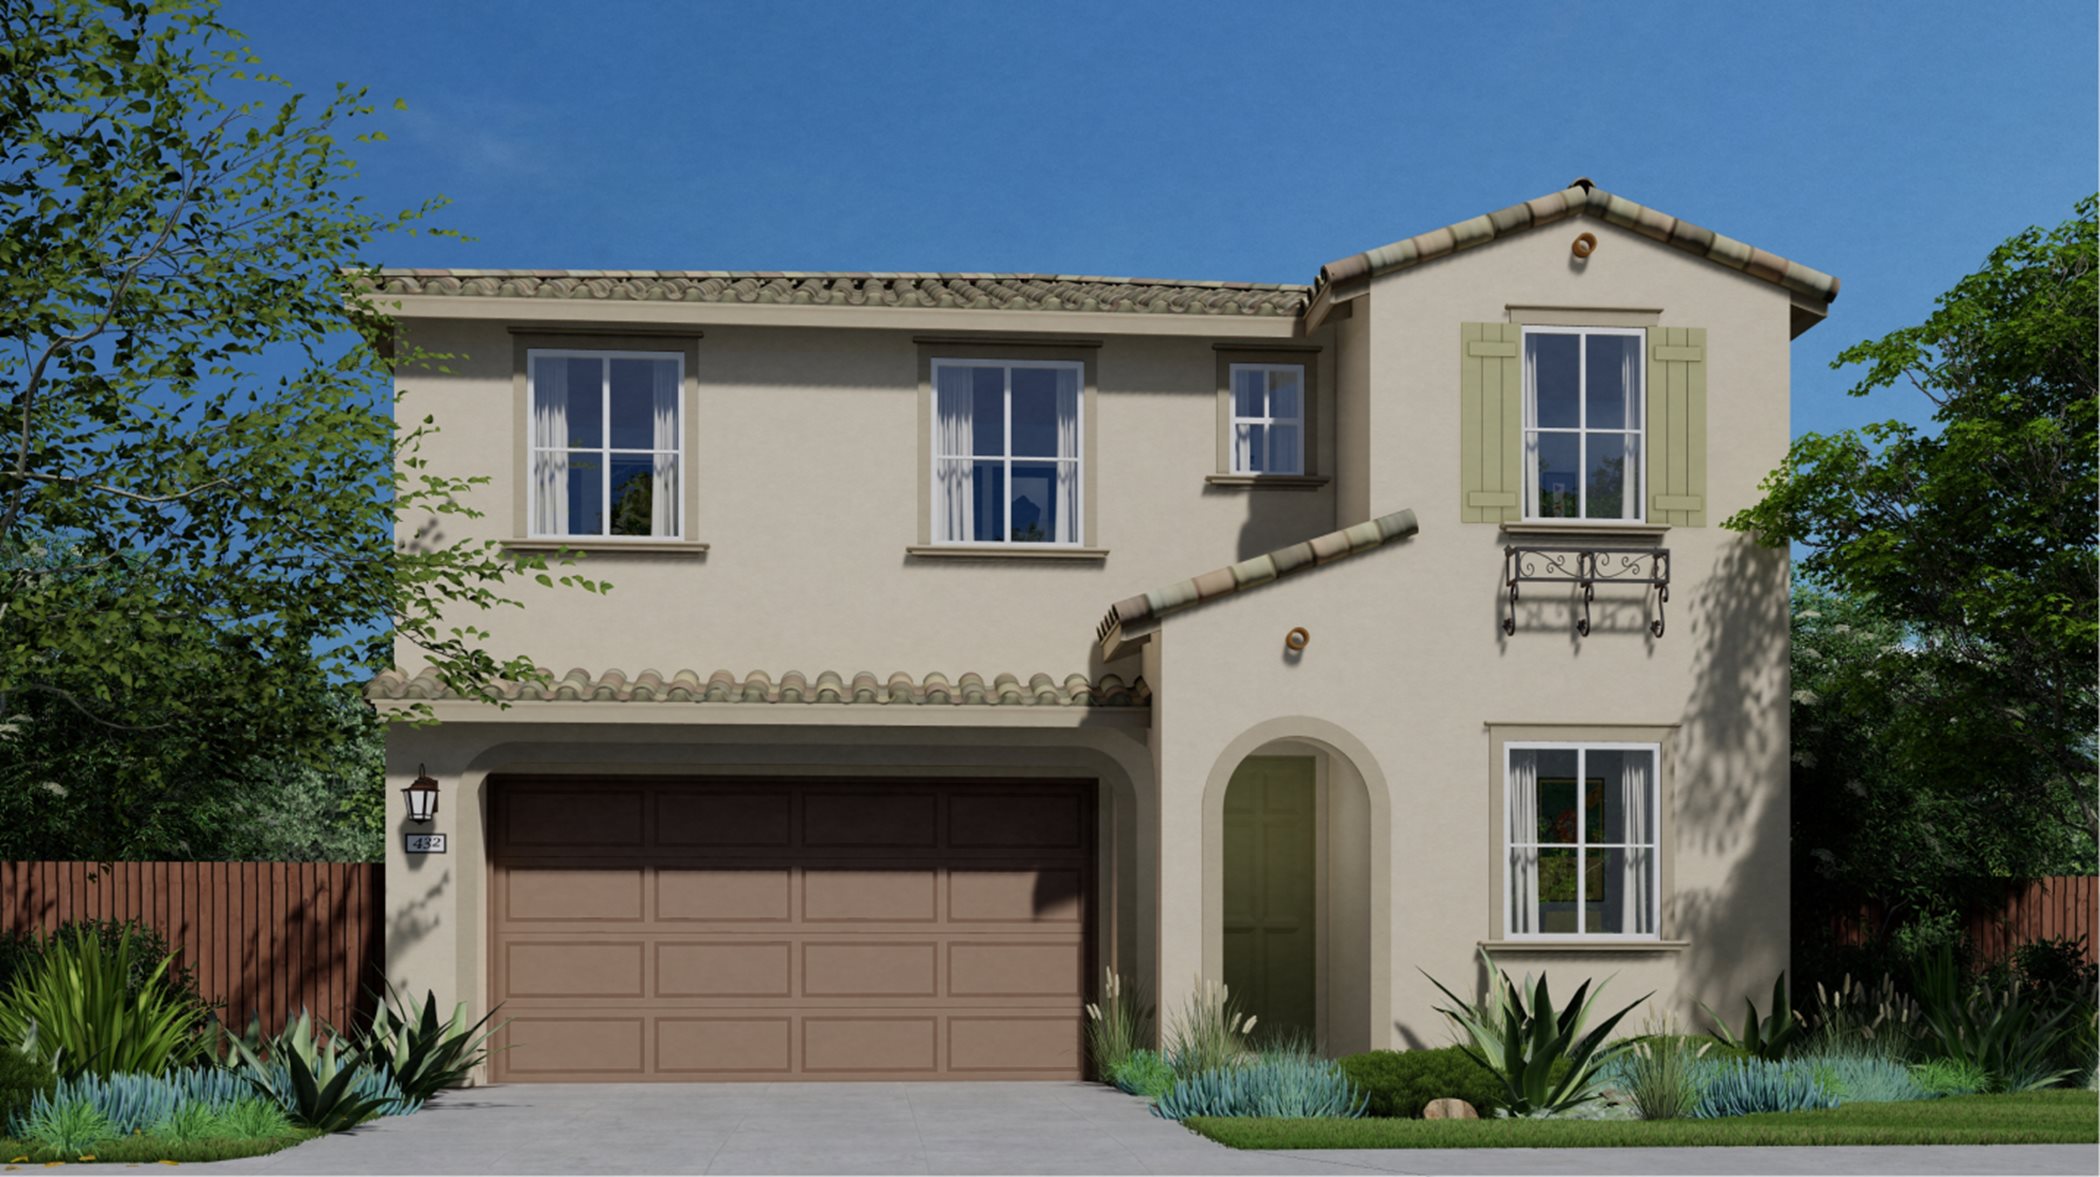 Residence 2024 Elevation A - Spanish Colonial